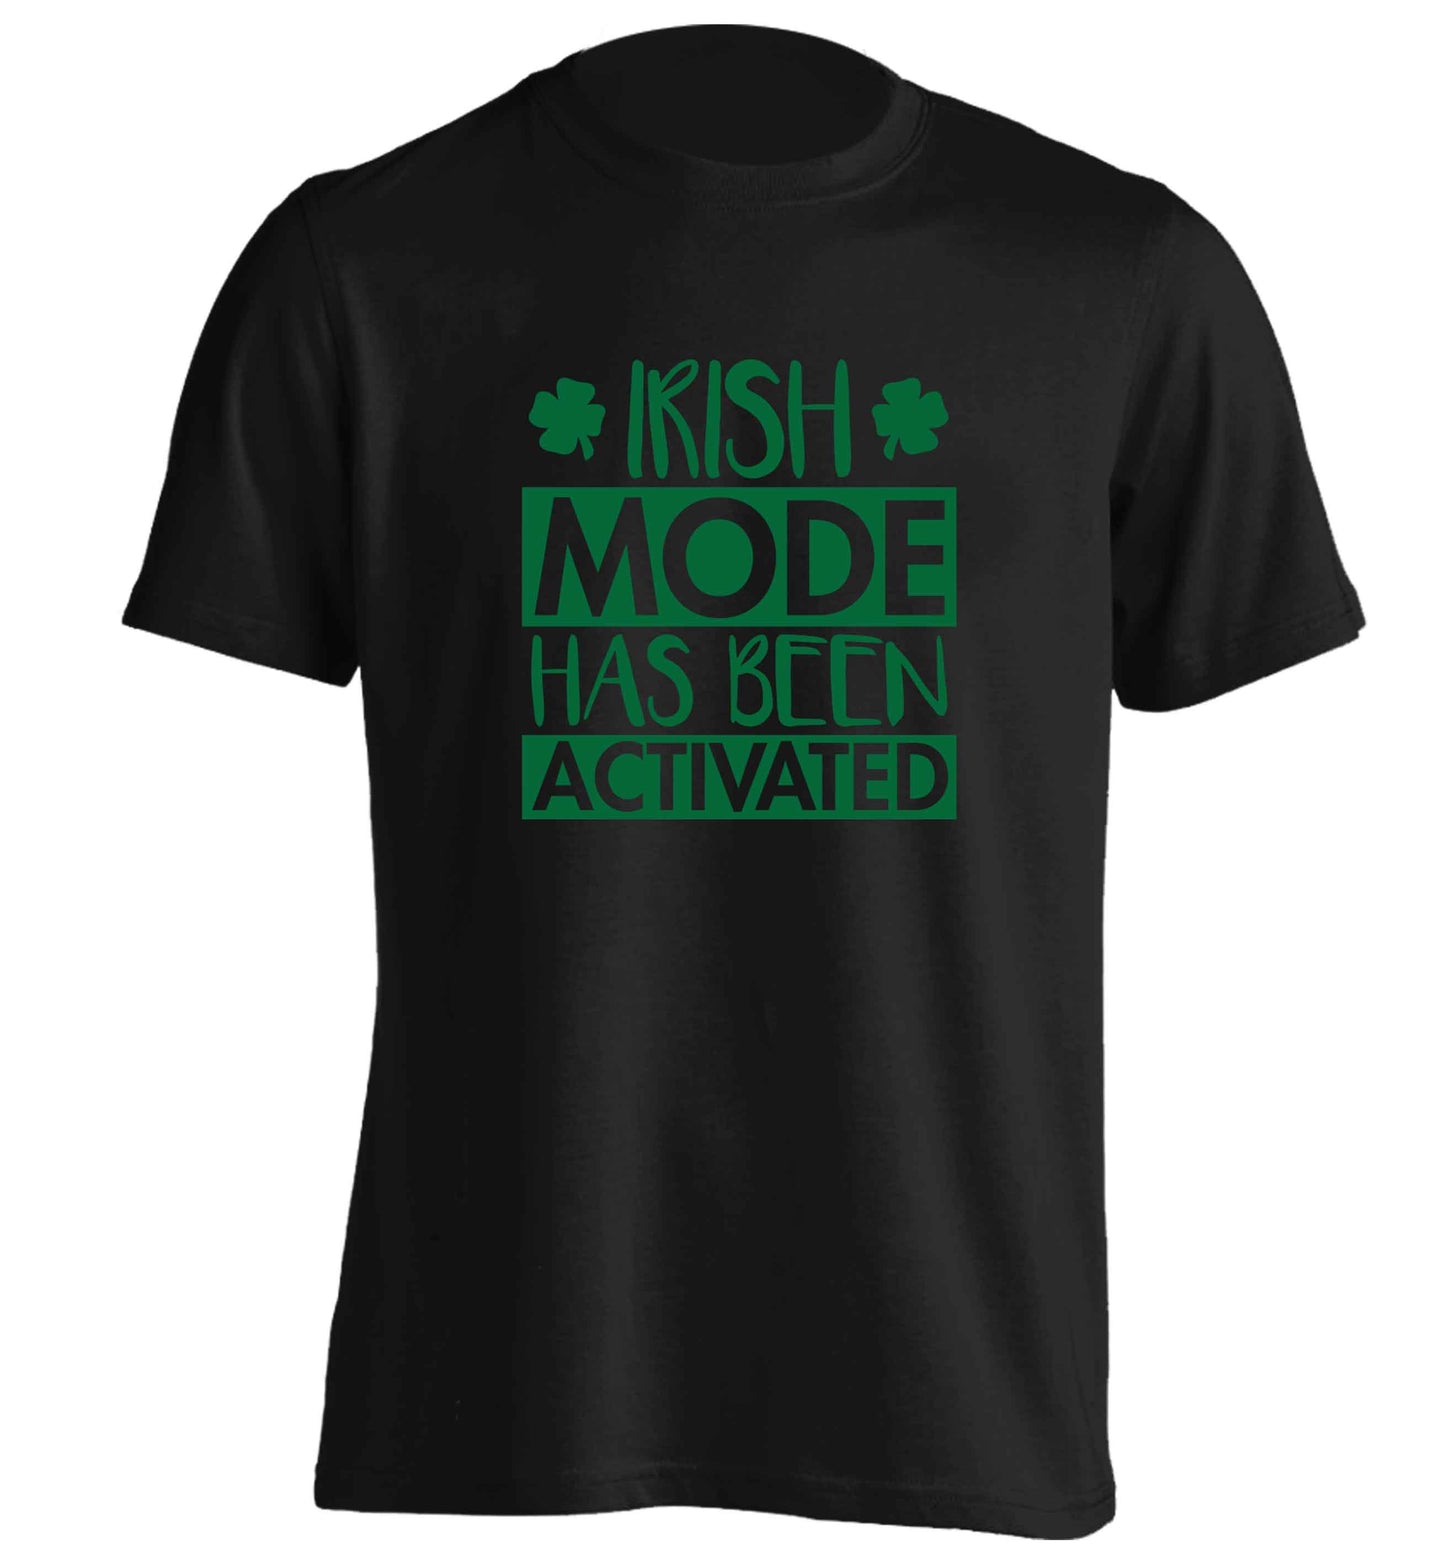 Irish mode has been activated adults unisex black Tshirt 2XL